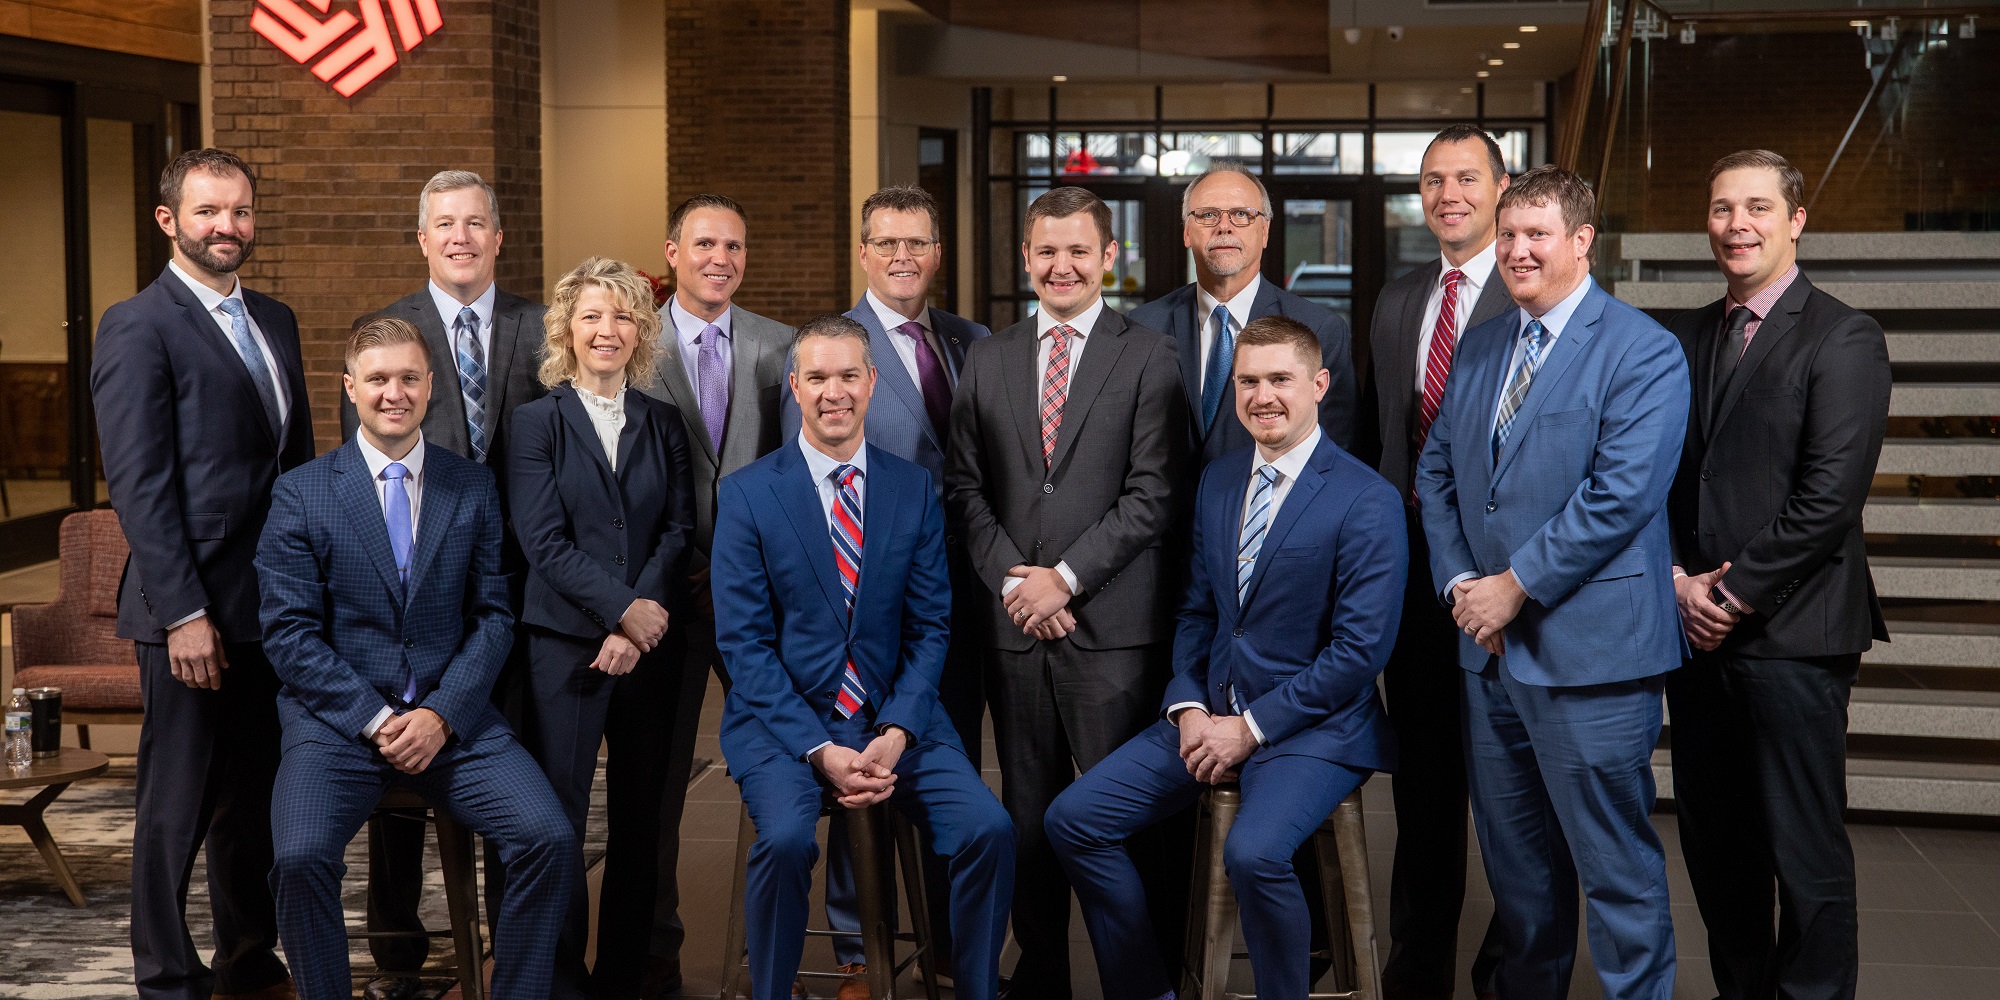 The 13-member Business Banking team of The First National Bank in Sioux Falls.